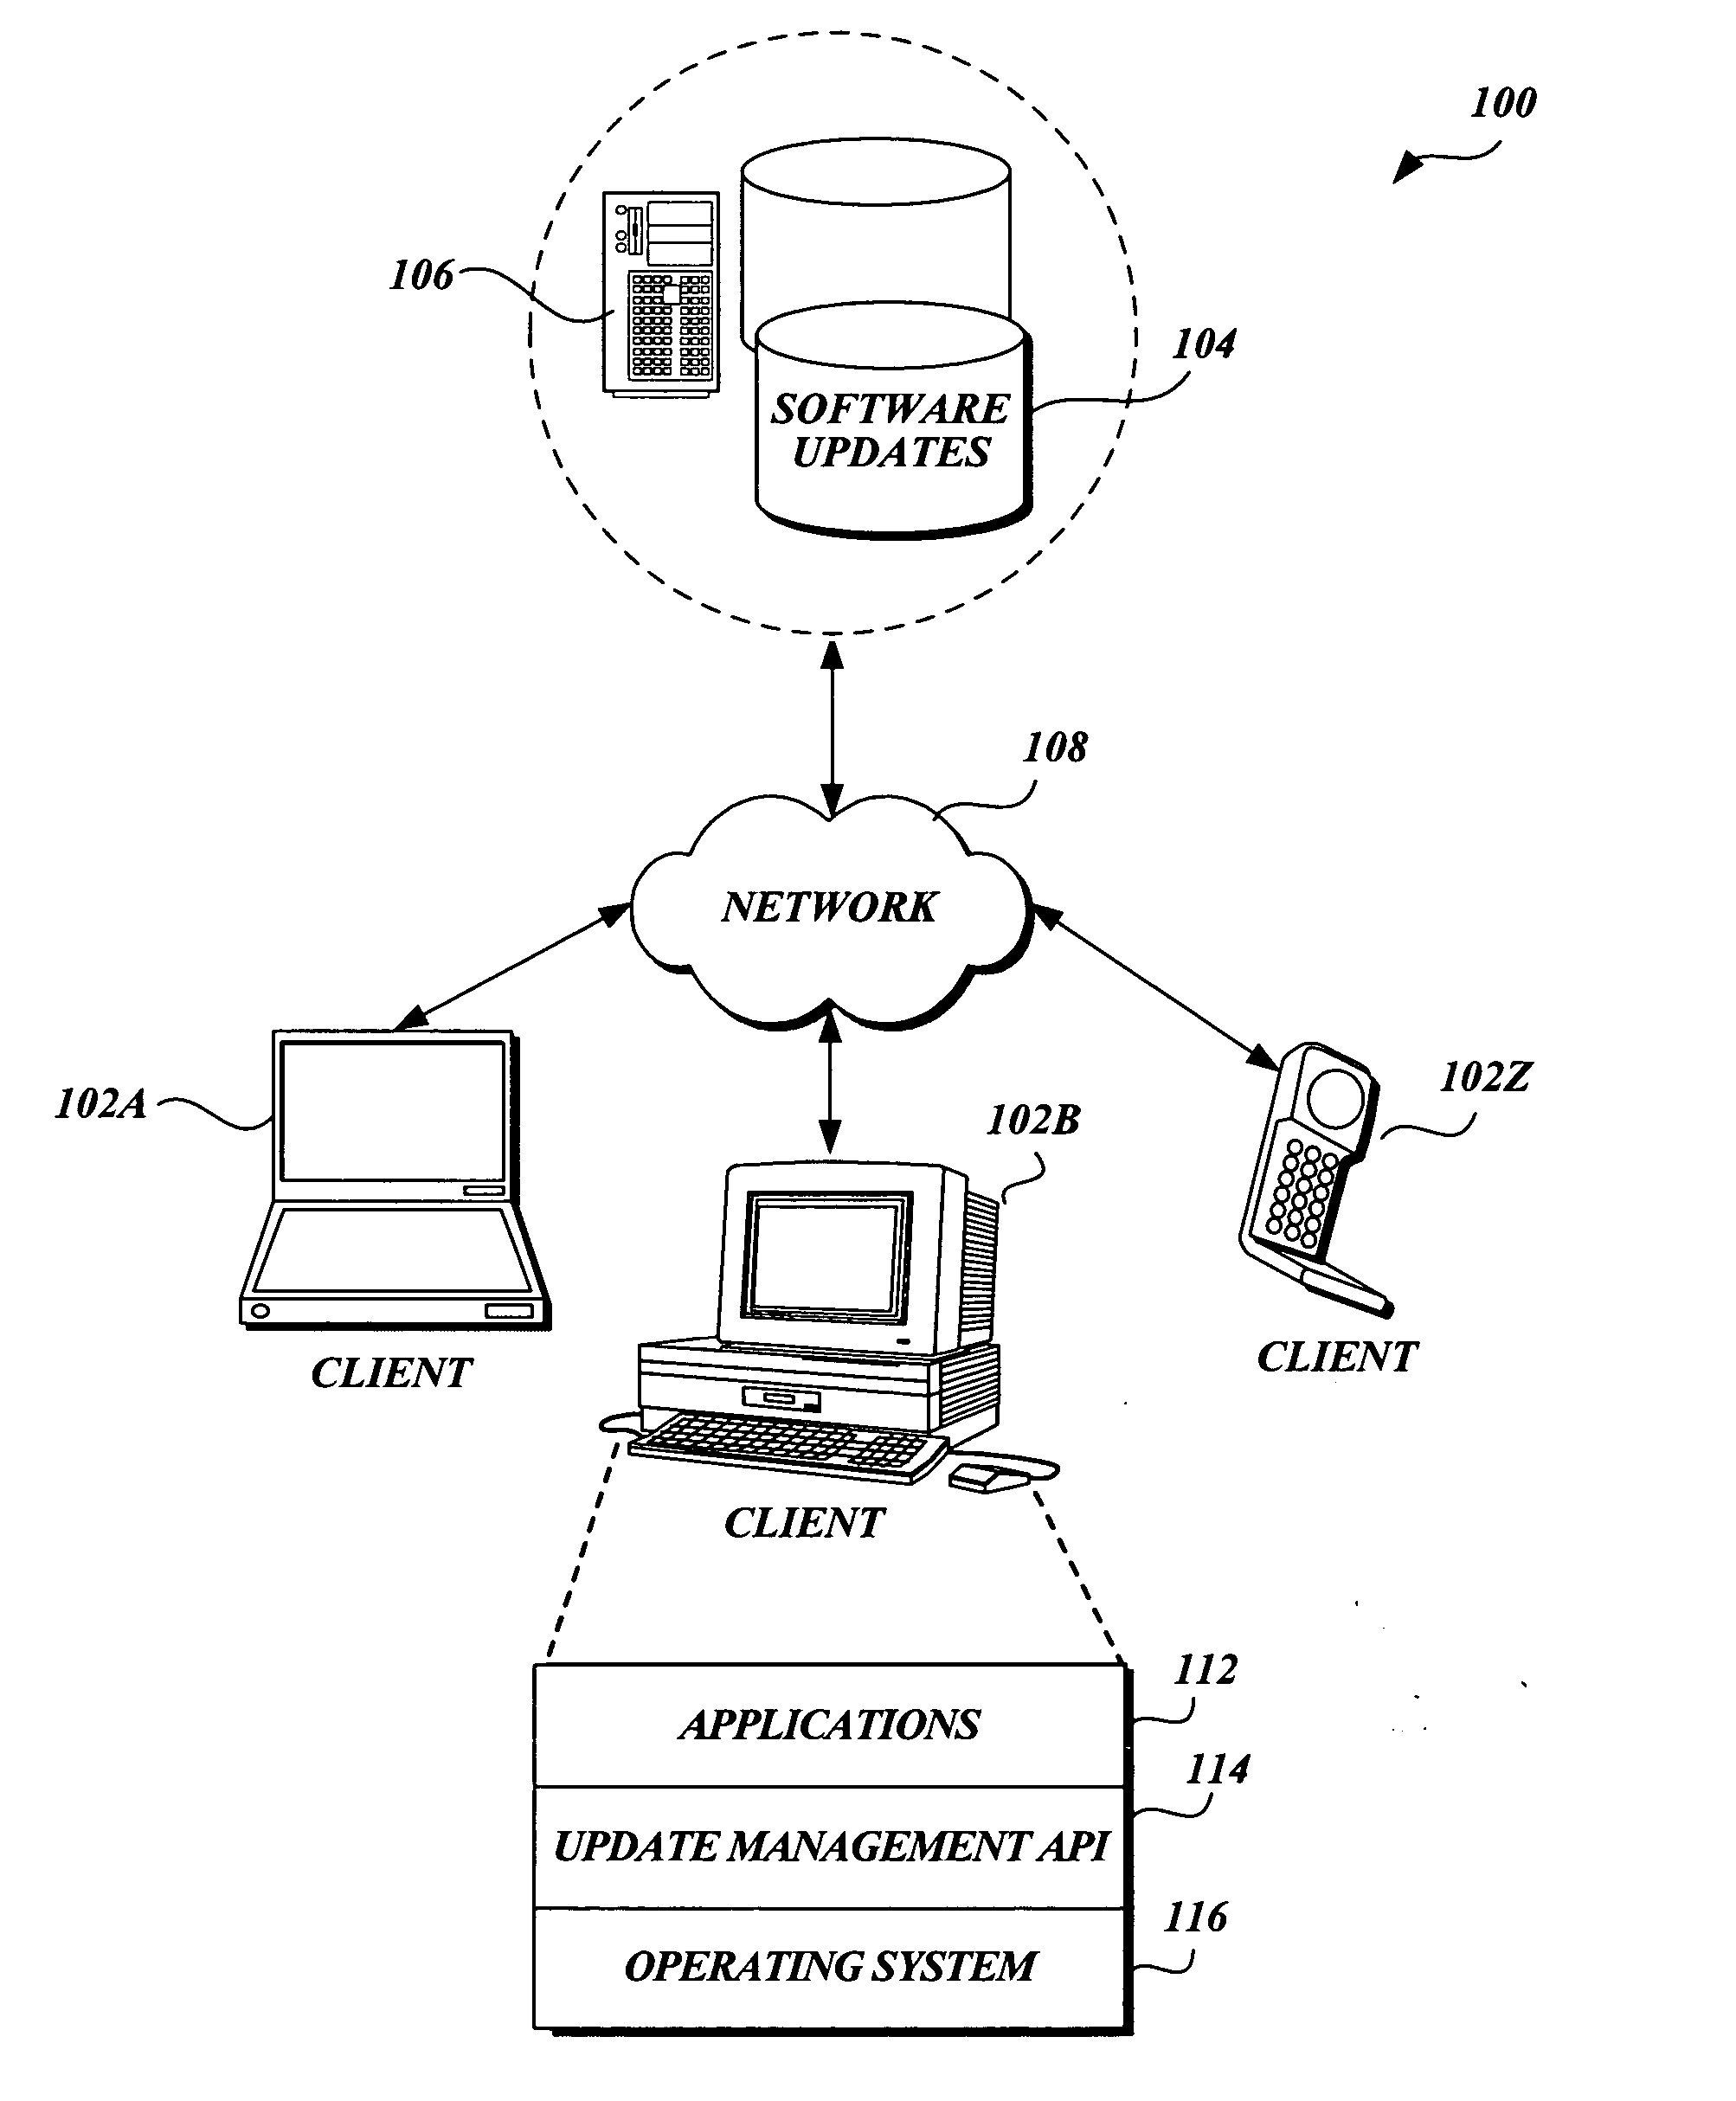 Application programming interface for identifying, downloading and installing applicable software updates